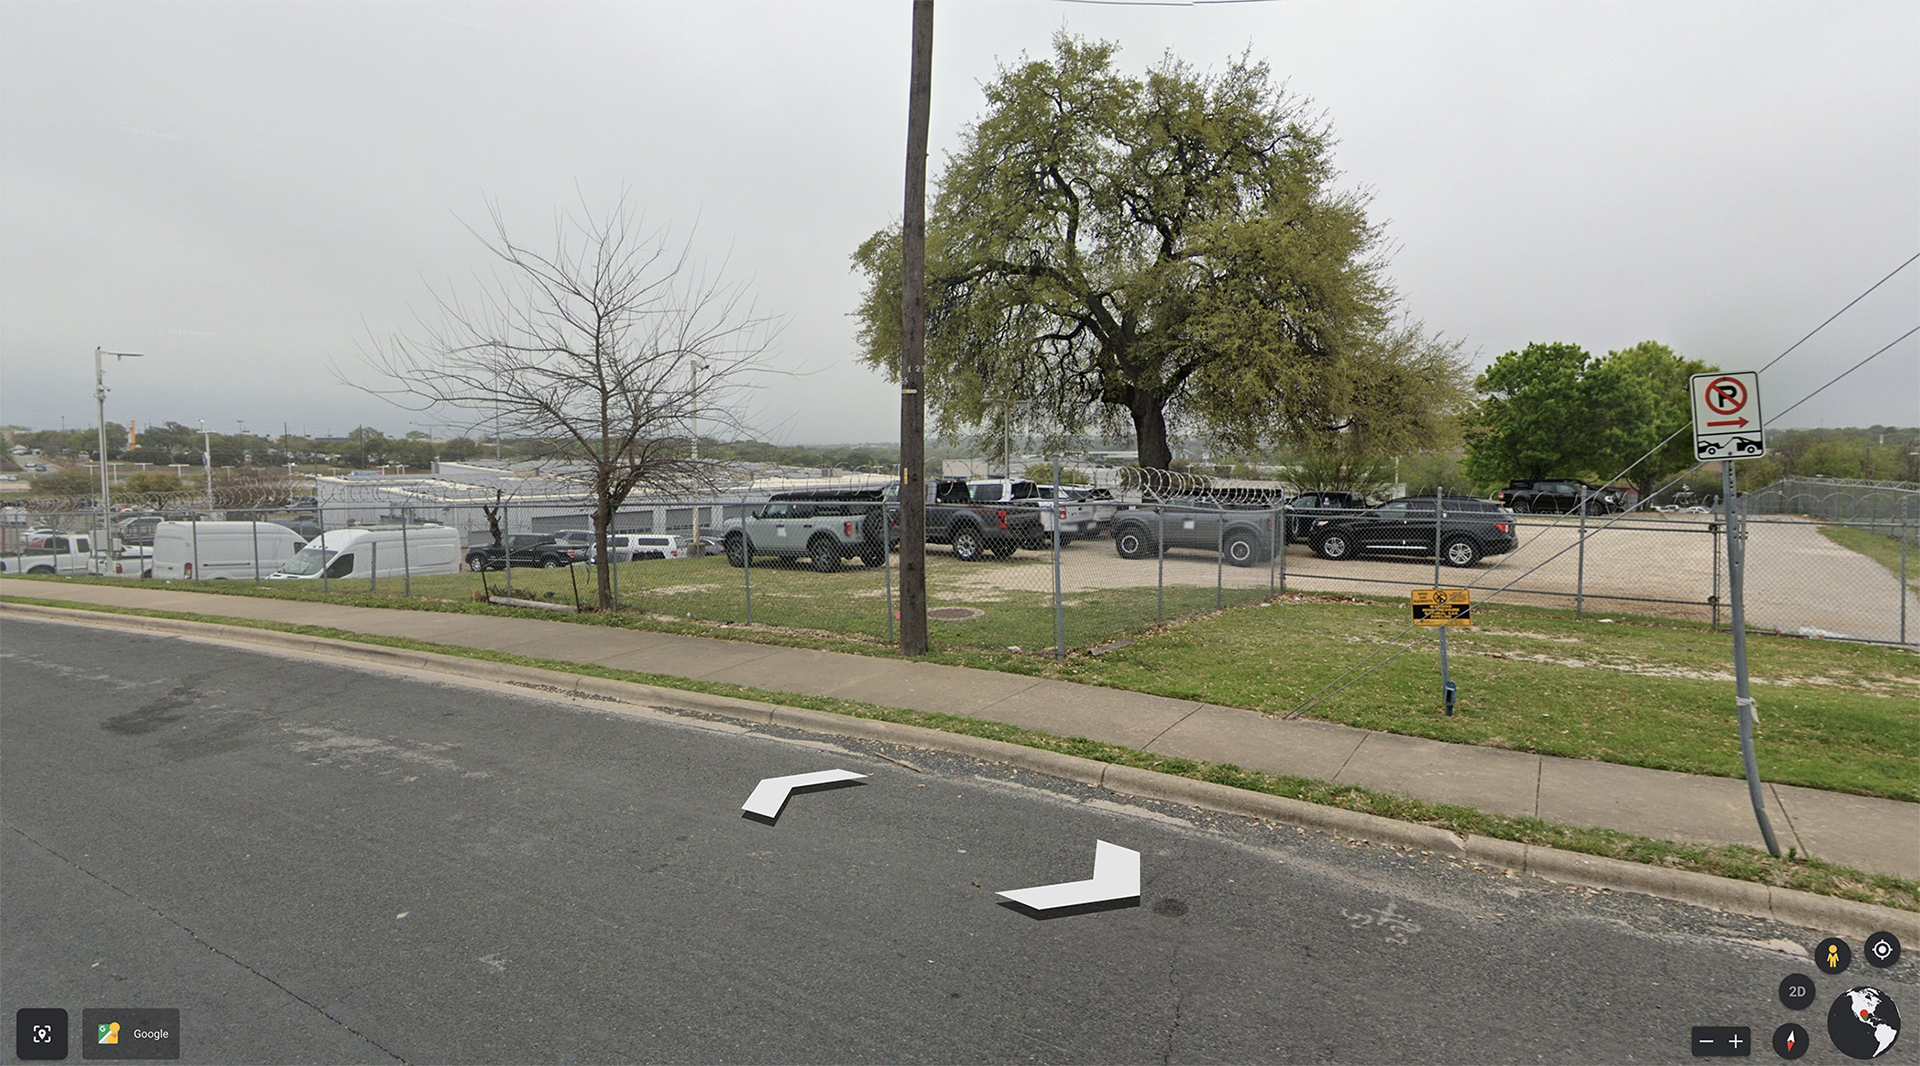 landscape image of a parking lots with cars, trucks, and a tree in the distance. 